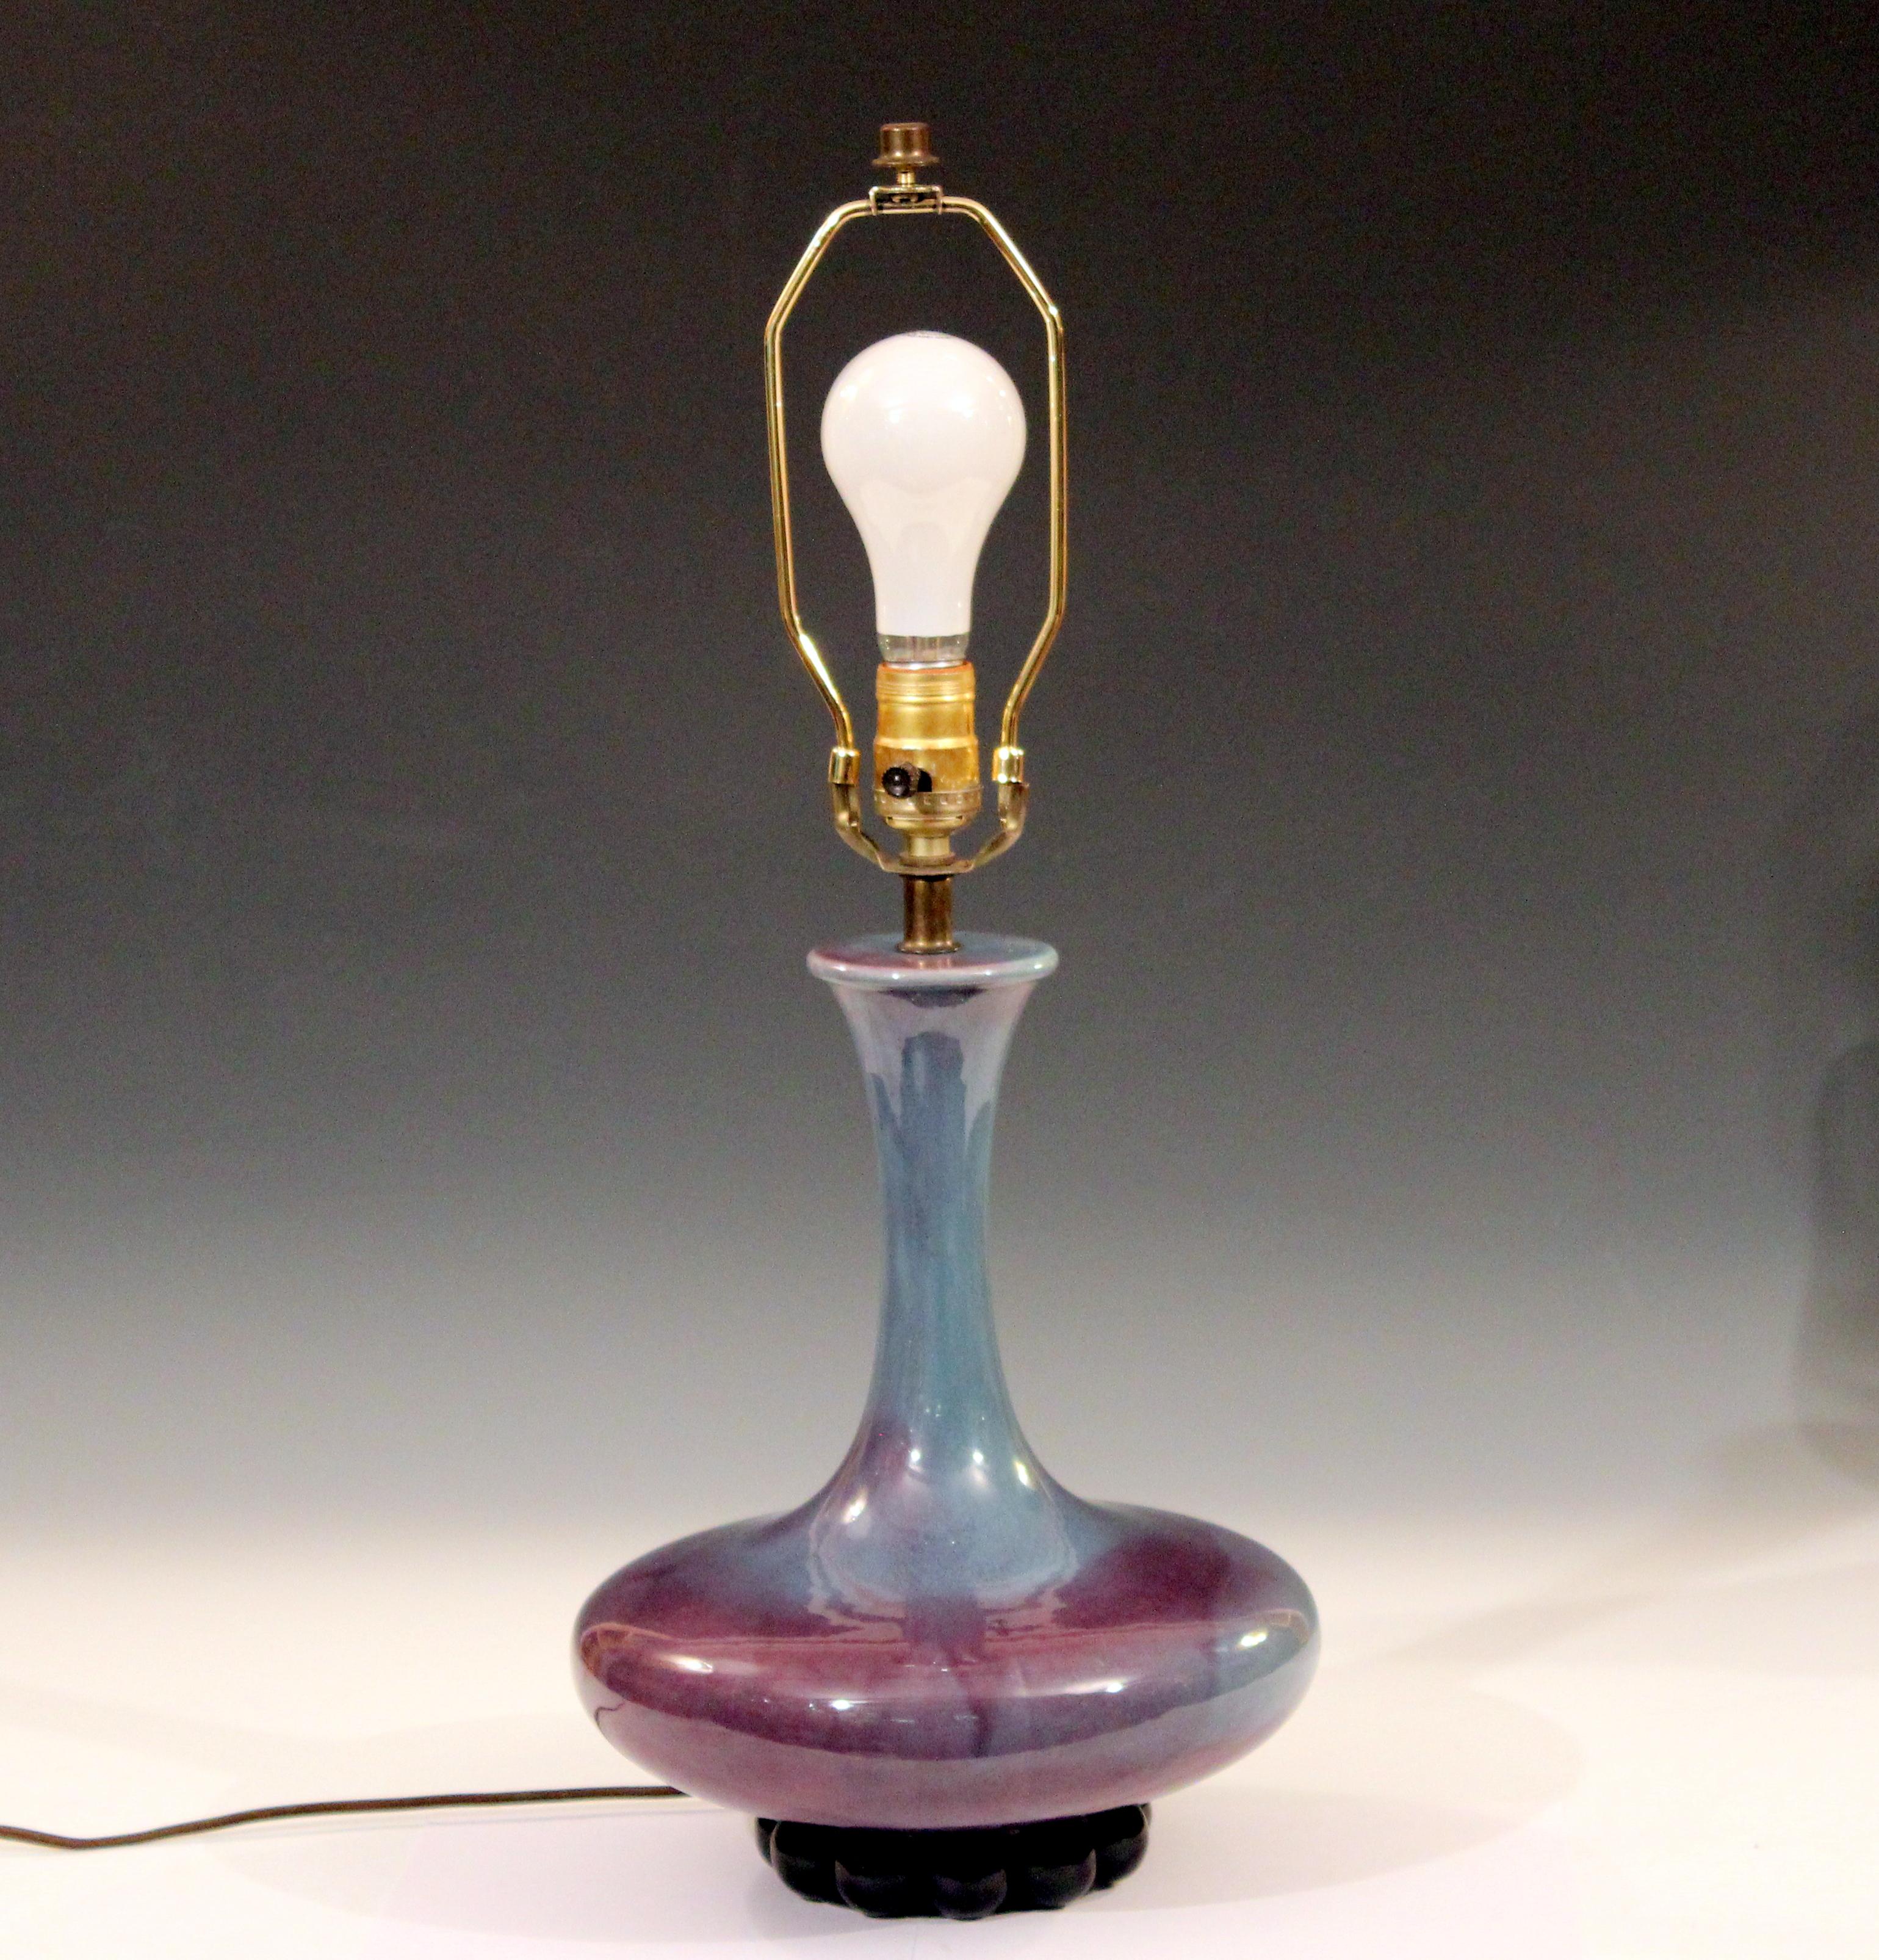 Vintage Art Deco Royal Haeger lamp in Chinese inspired form with blue/purple flambe glaze on black ball bearing base, circa 1950s-1960s. Measures: 24